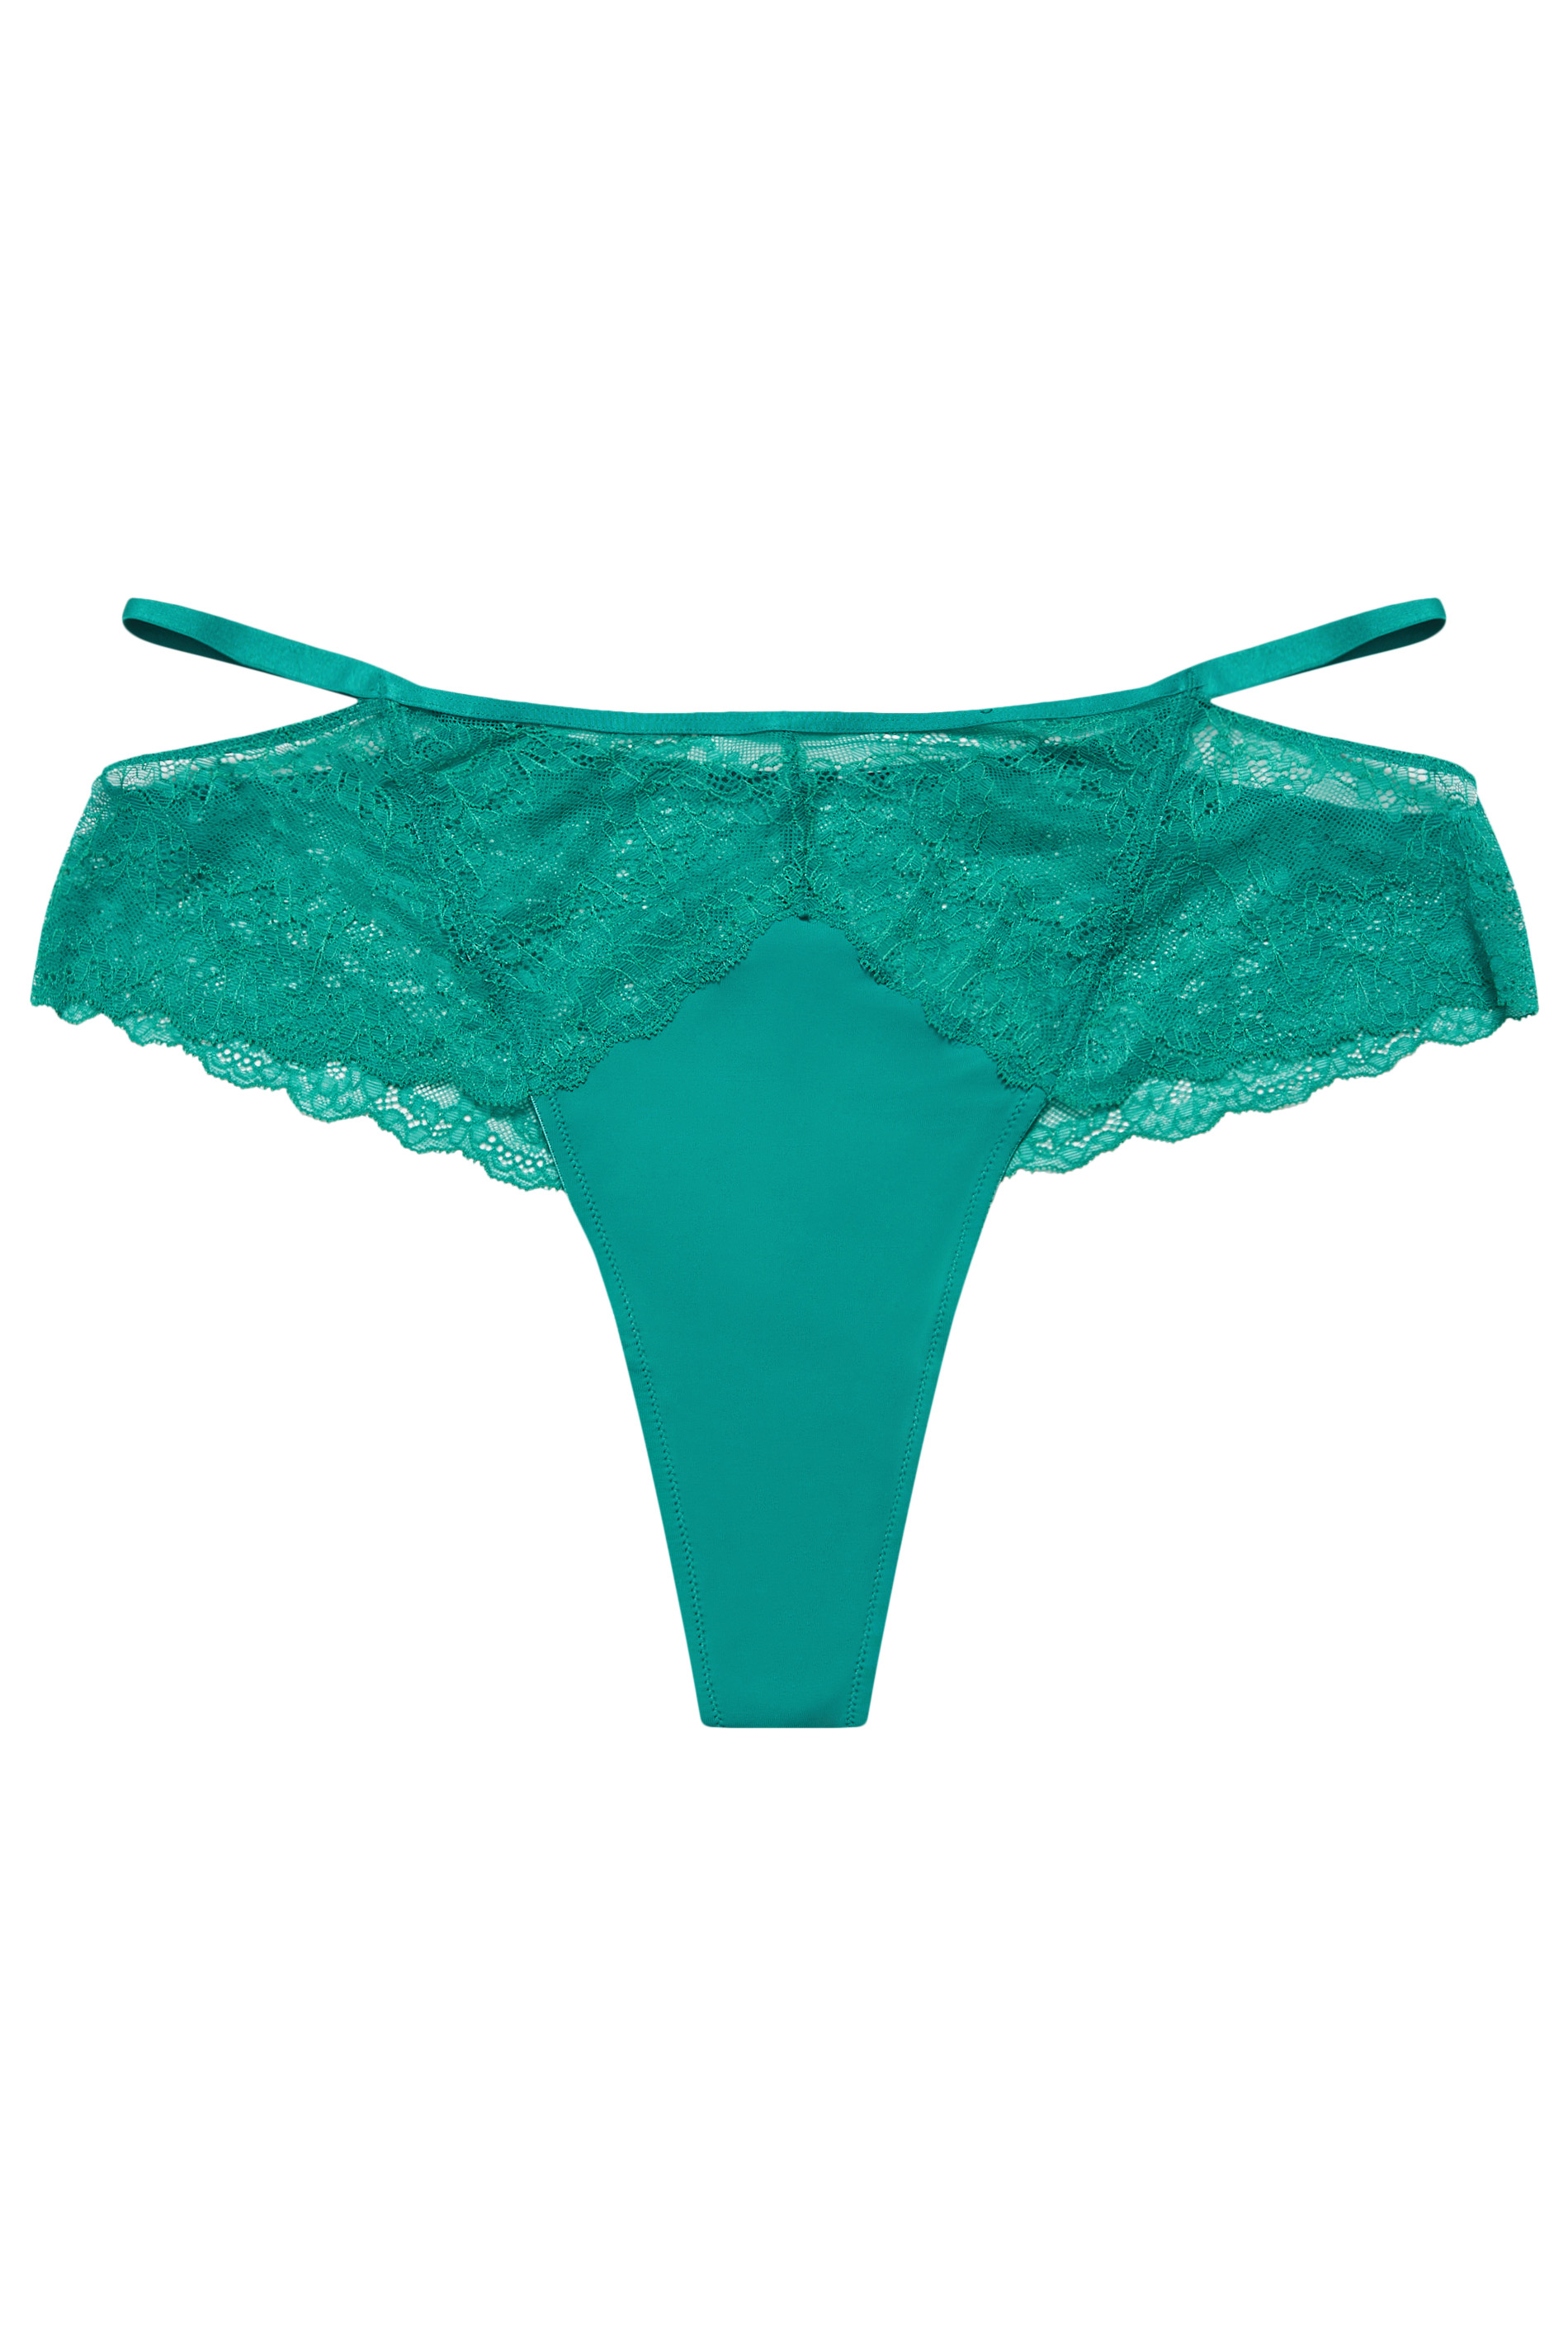 City Chic Green Lace Thong 1